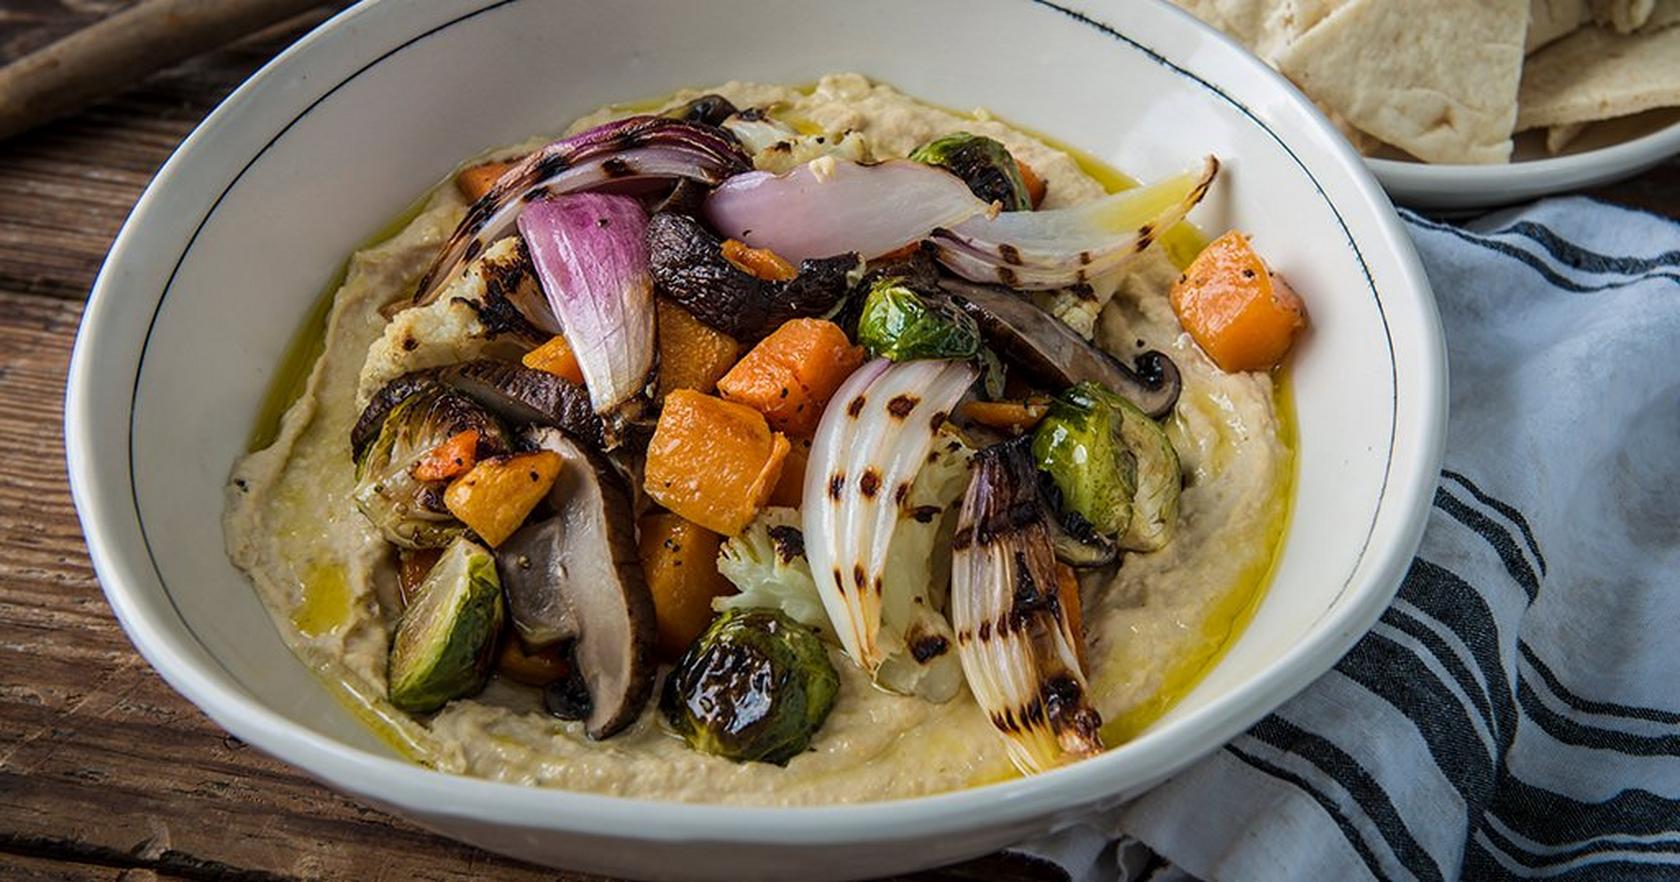 image of Smoked Hummus with Roasted Vegetables